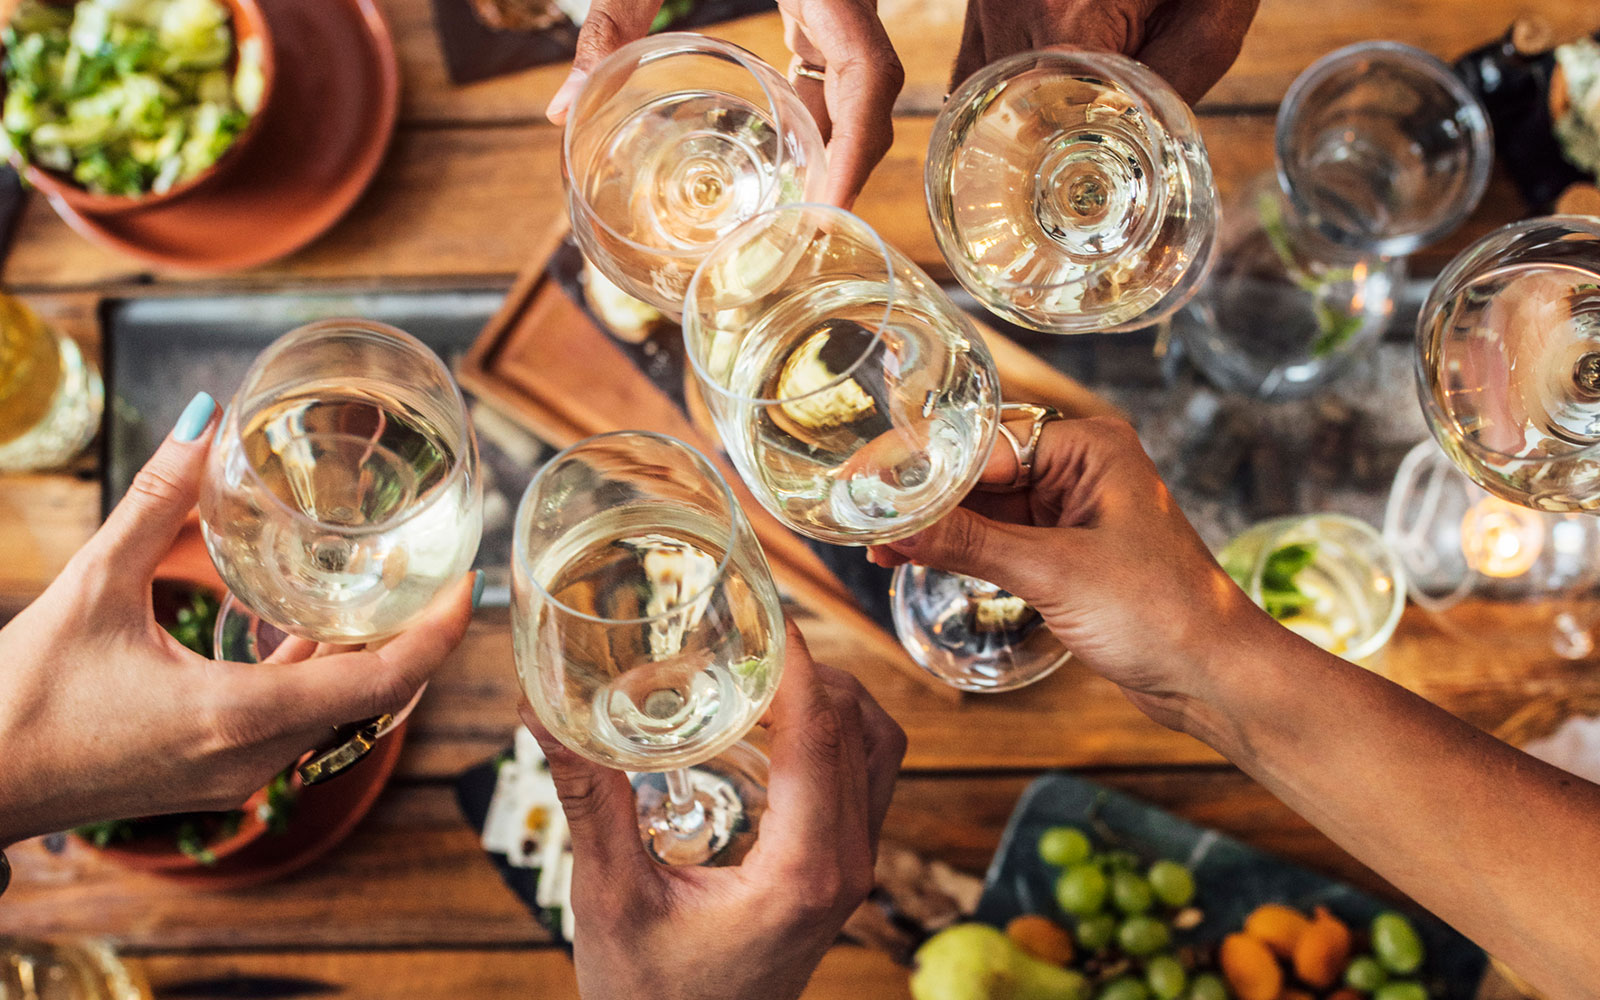 Bring your team together over a shared meal complete with wine pairings